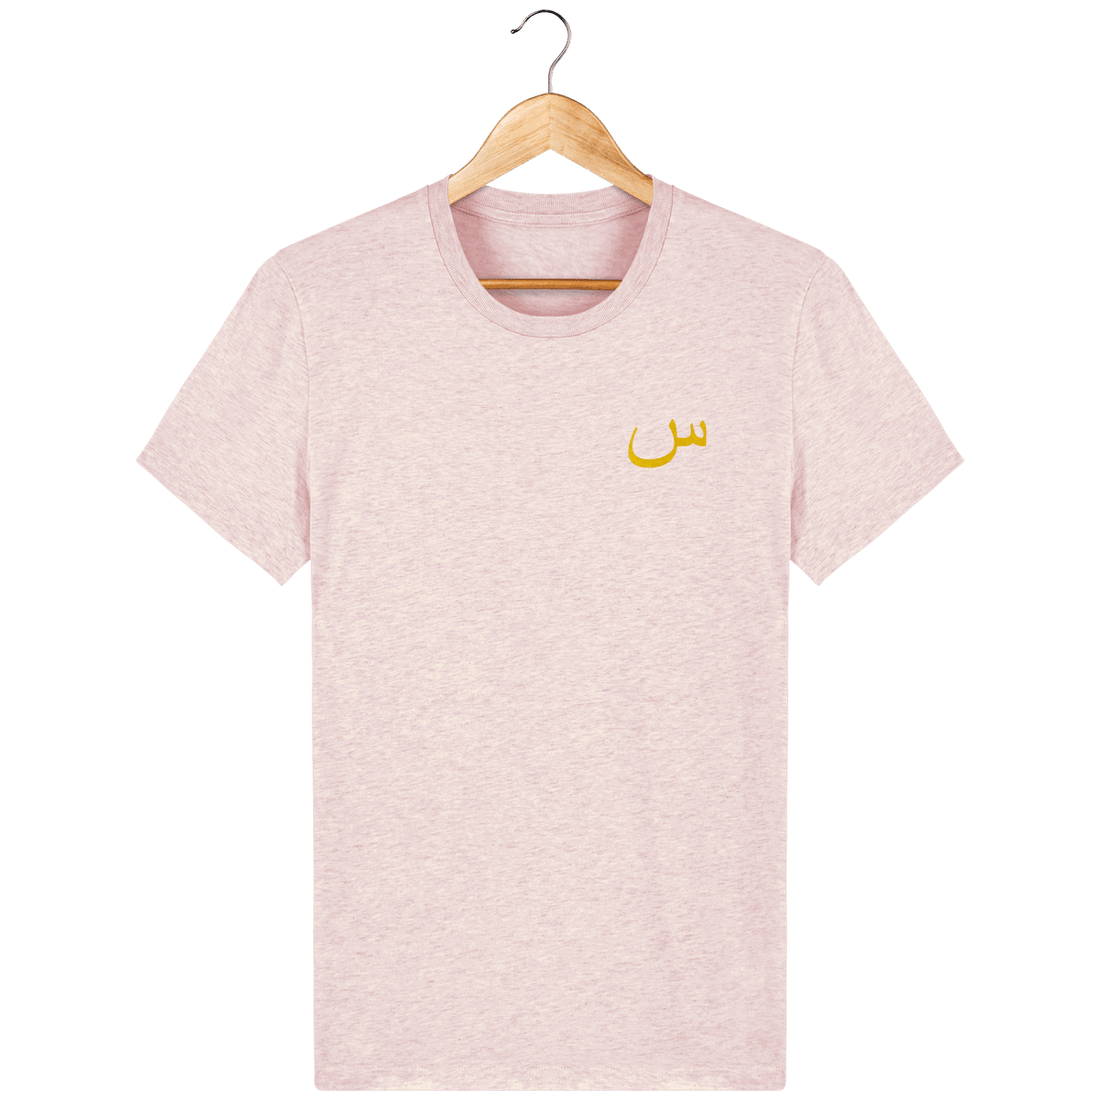 Unisexe>Tee-shirts - T-Shirt Homme <br> Lettre Arabe Siin